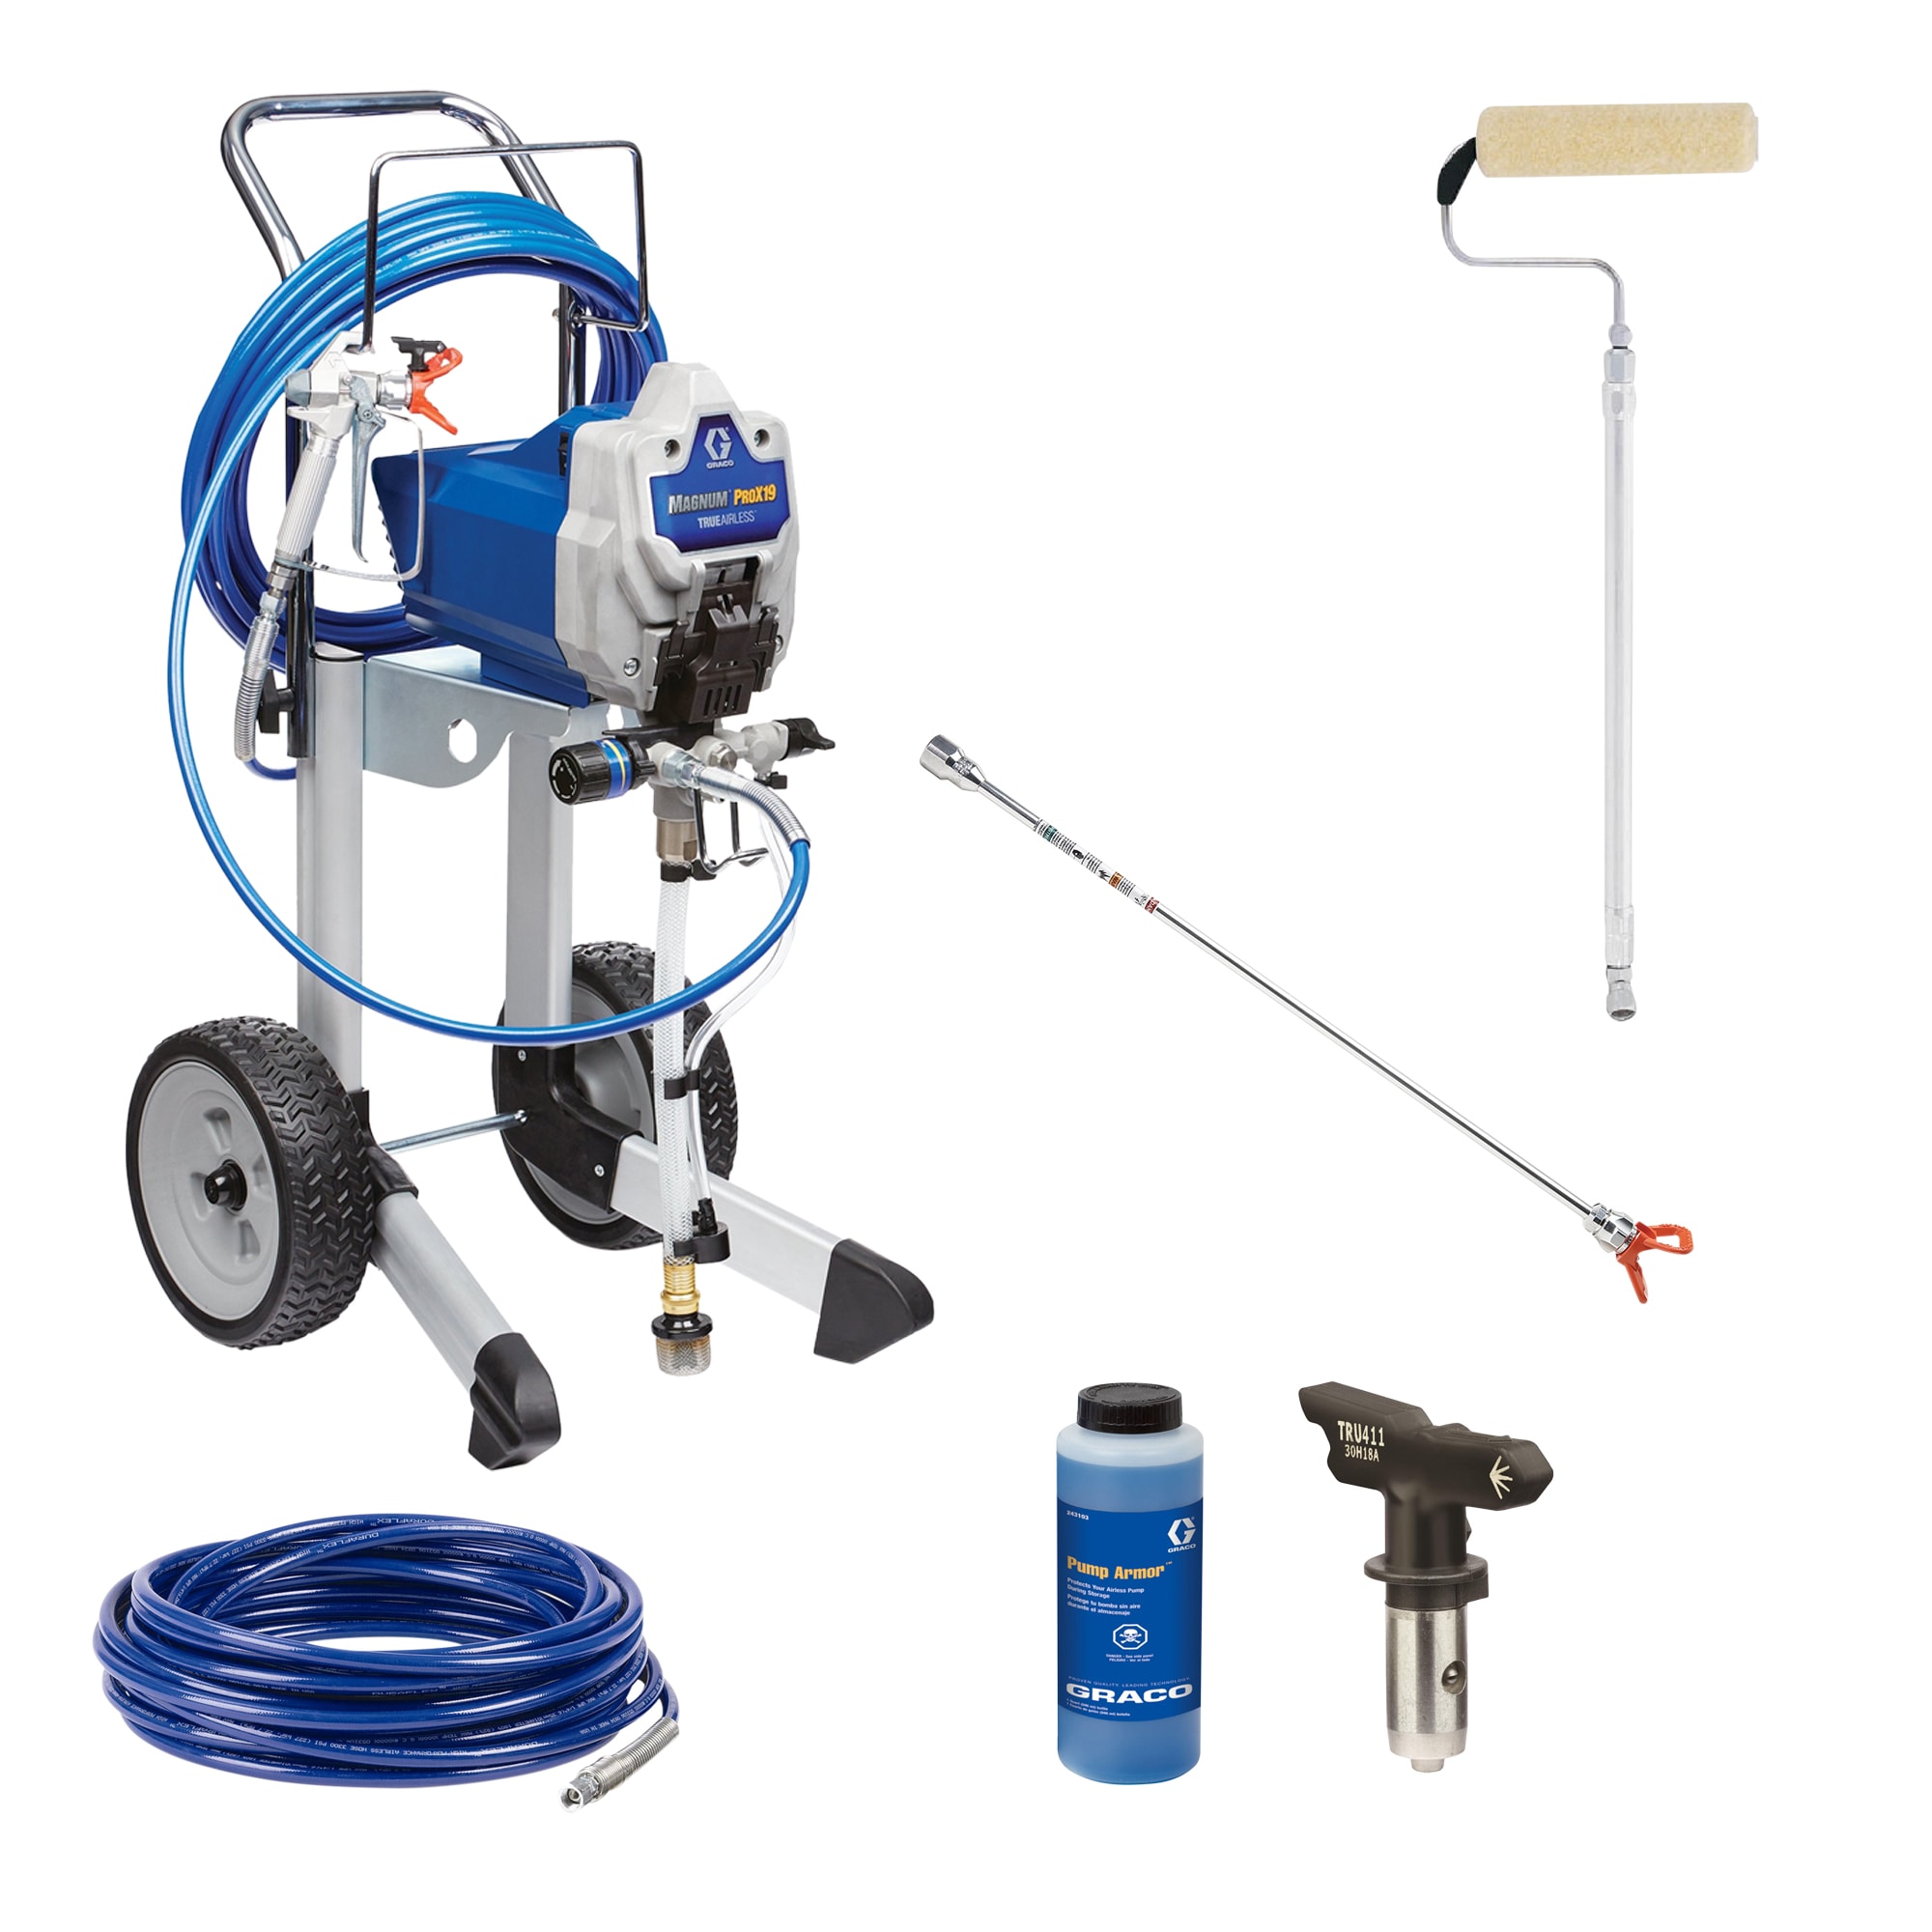 915830-1 Graco Airless Paint Sprayer, 1/2 HP, 0.27 gpm Flow Rate